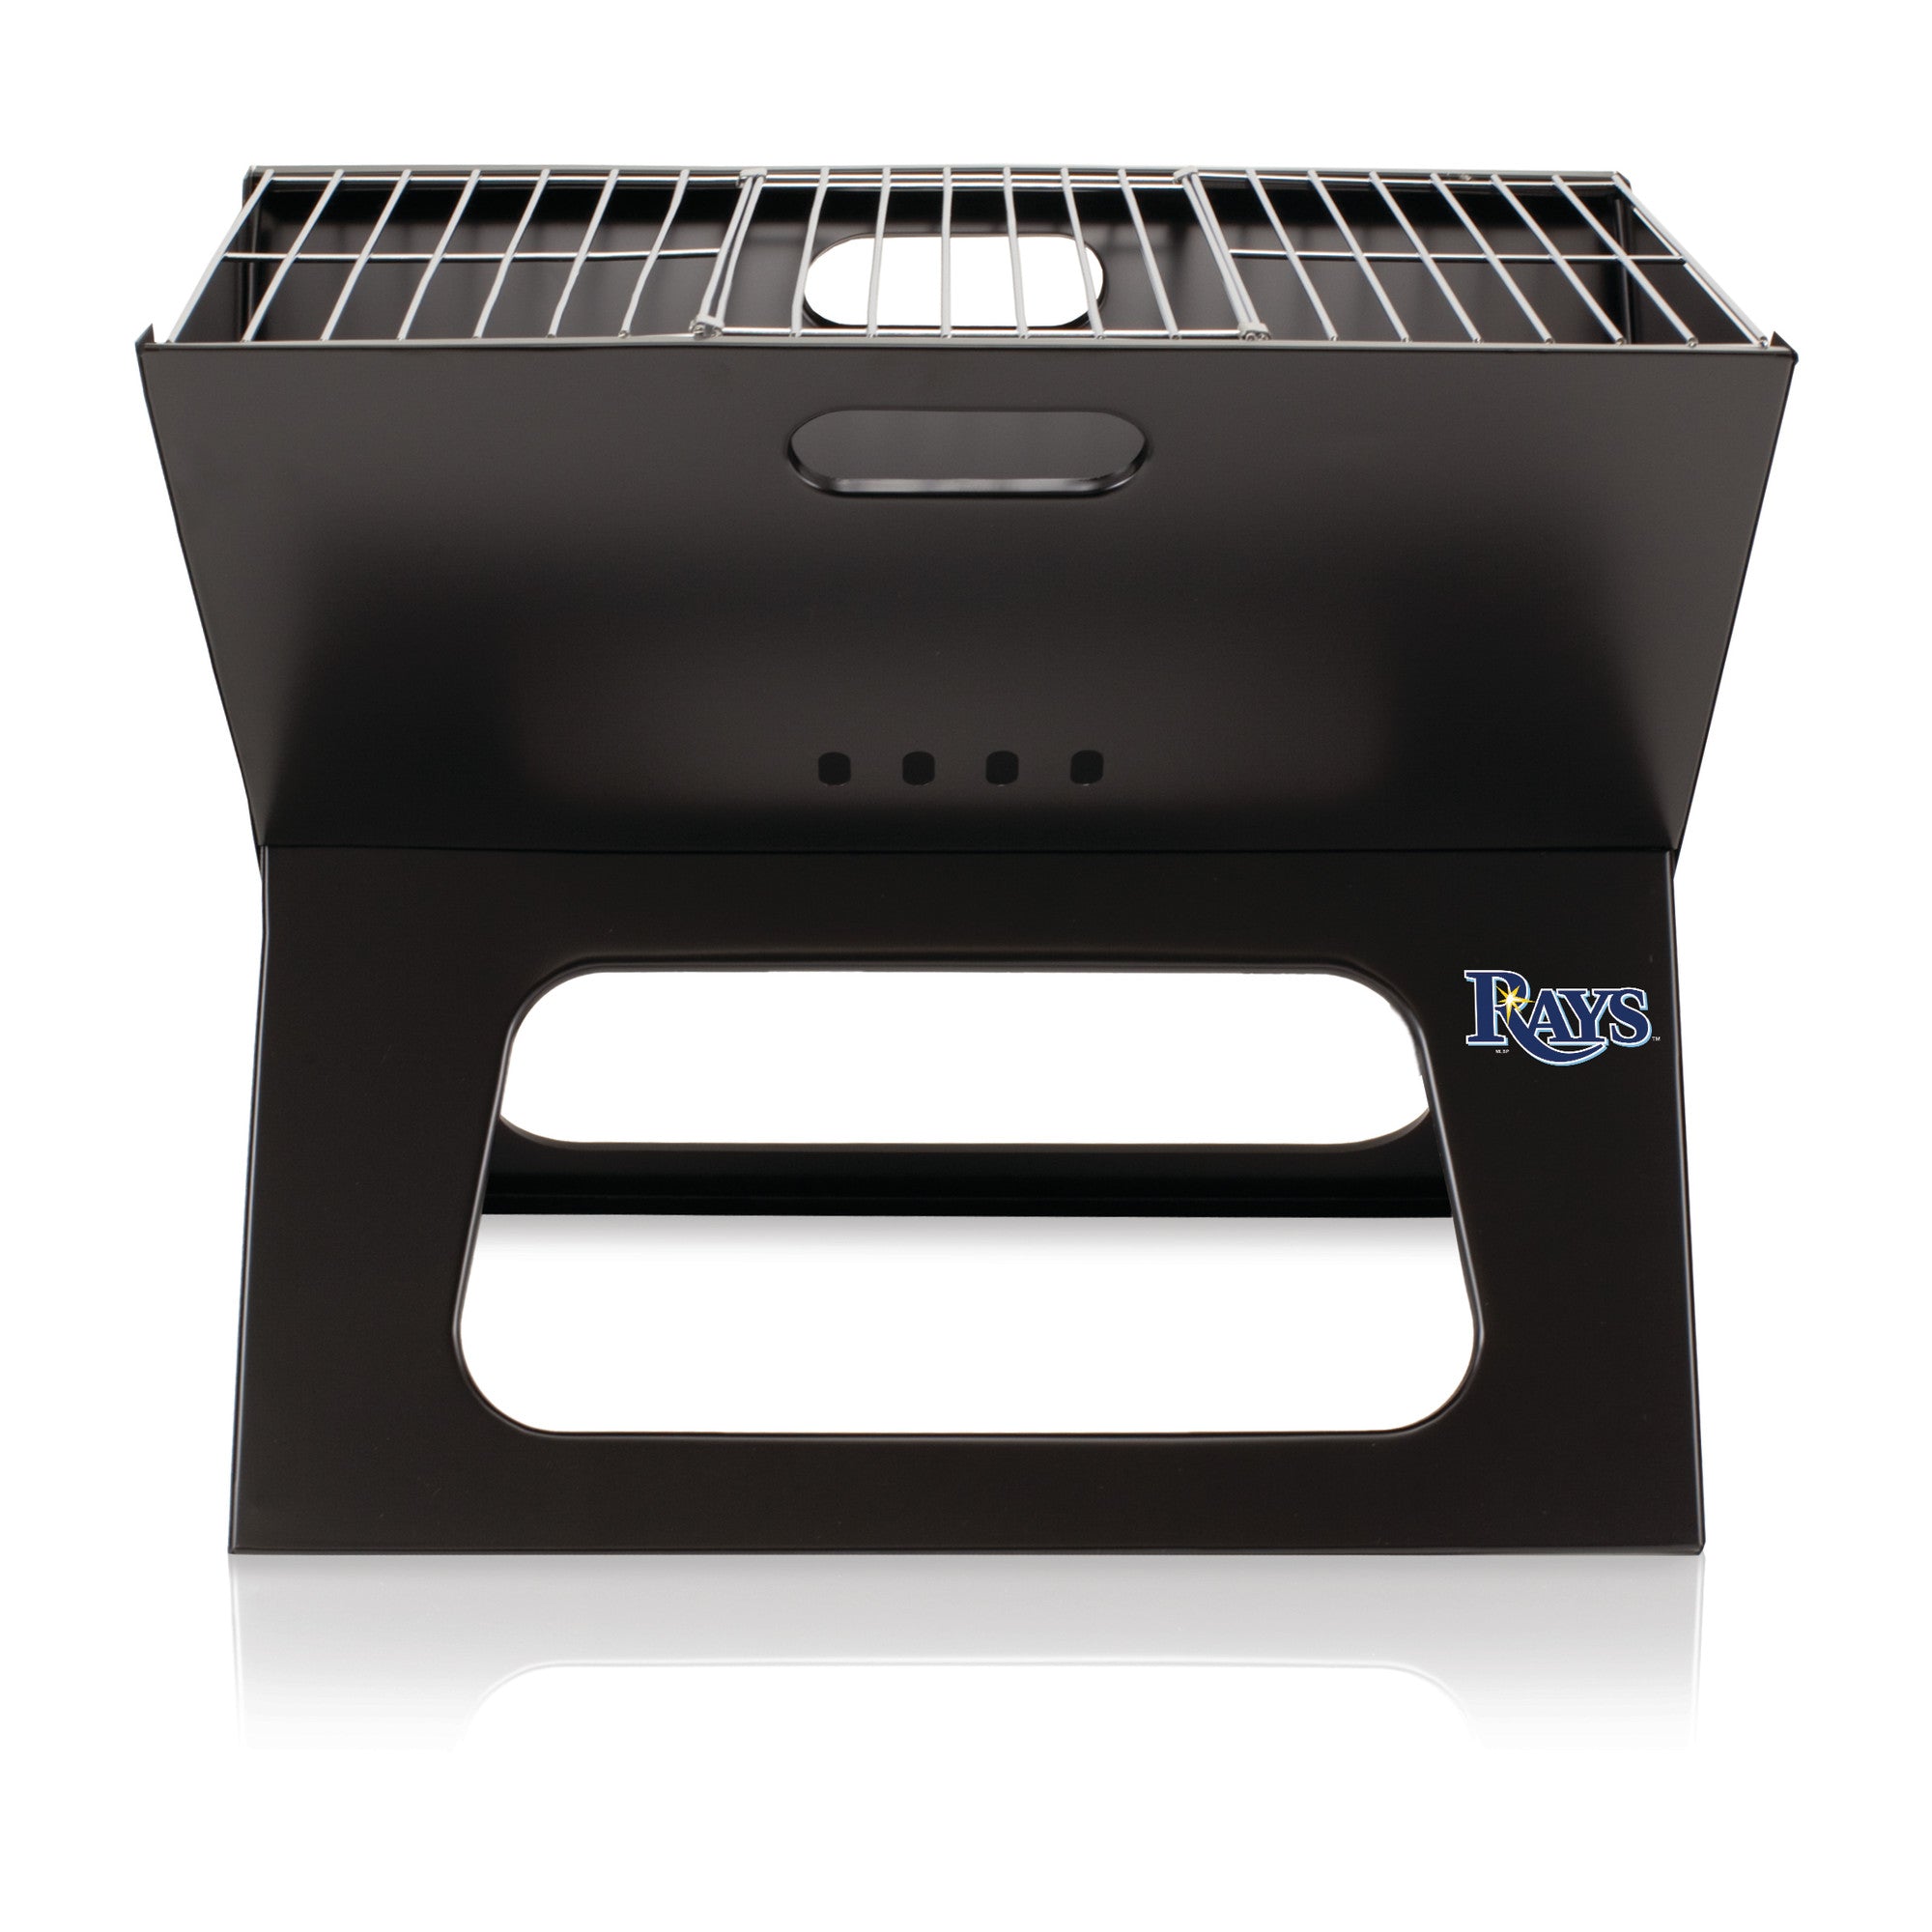 Tampa Bay Rays - X-Grill Portable Charcoal BBQ Grill